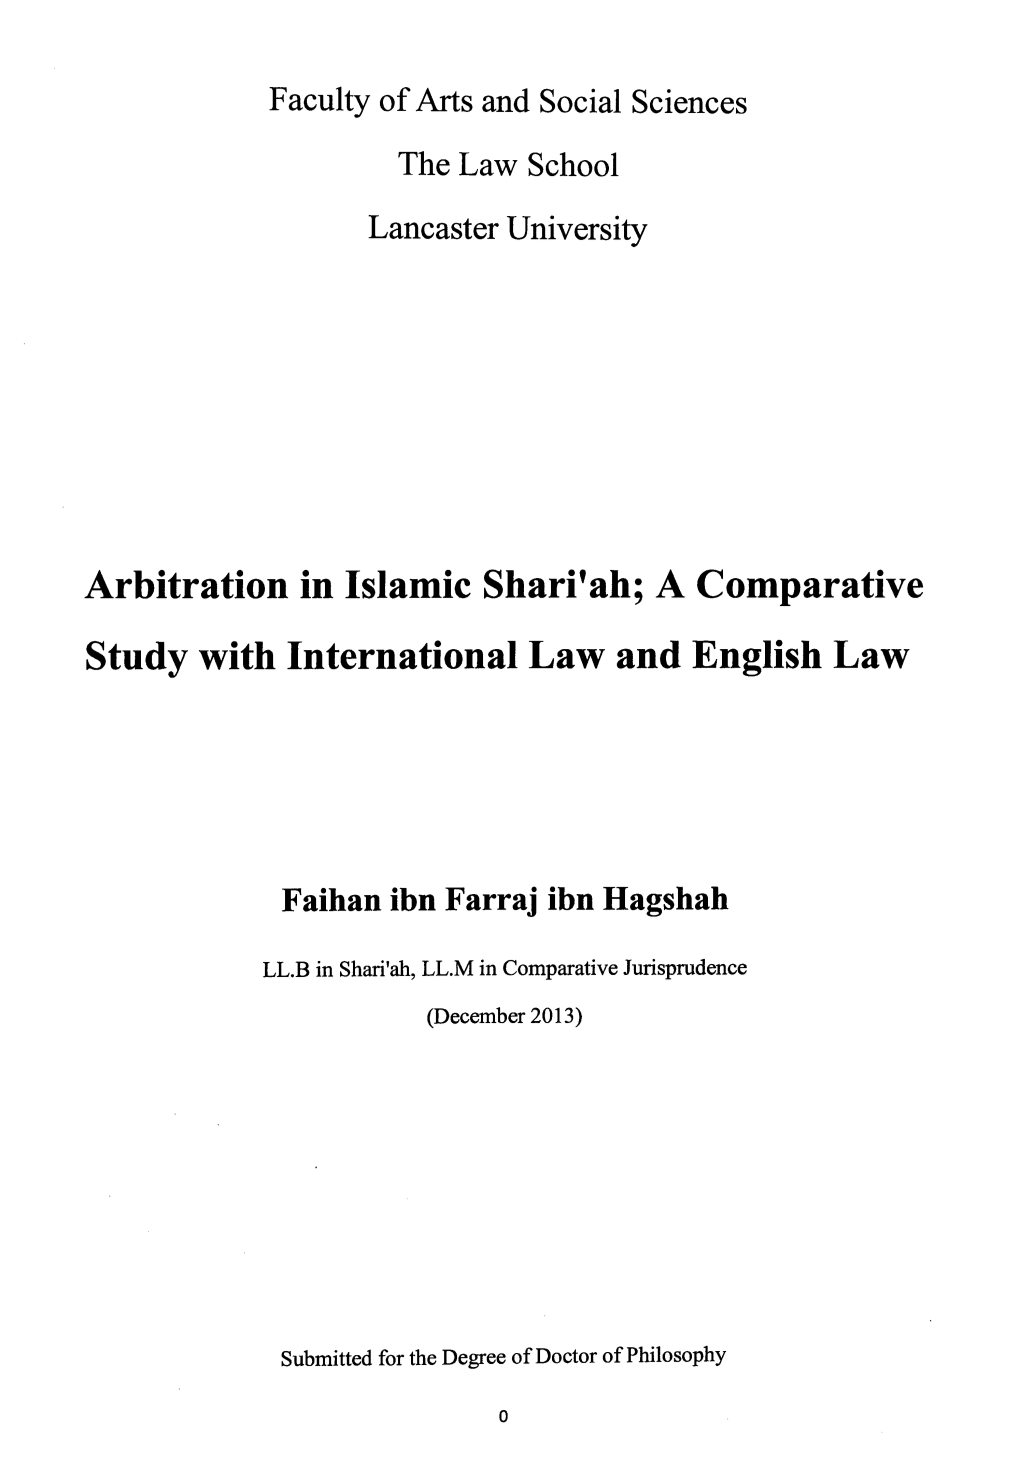 Arbitration in Islamic Shari'ah", a Paper Presented in European Council for Fatwa and Research, Available At